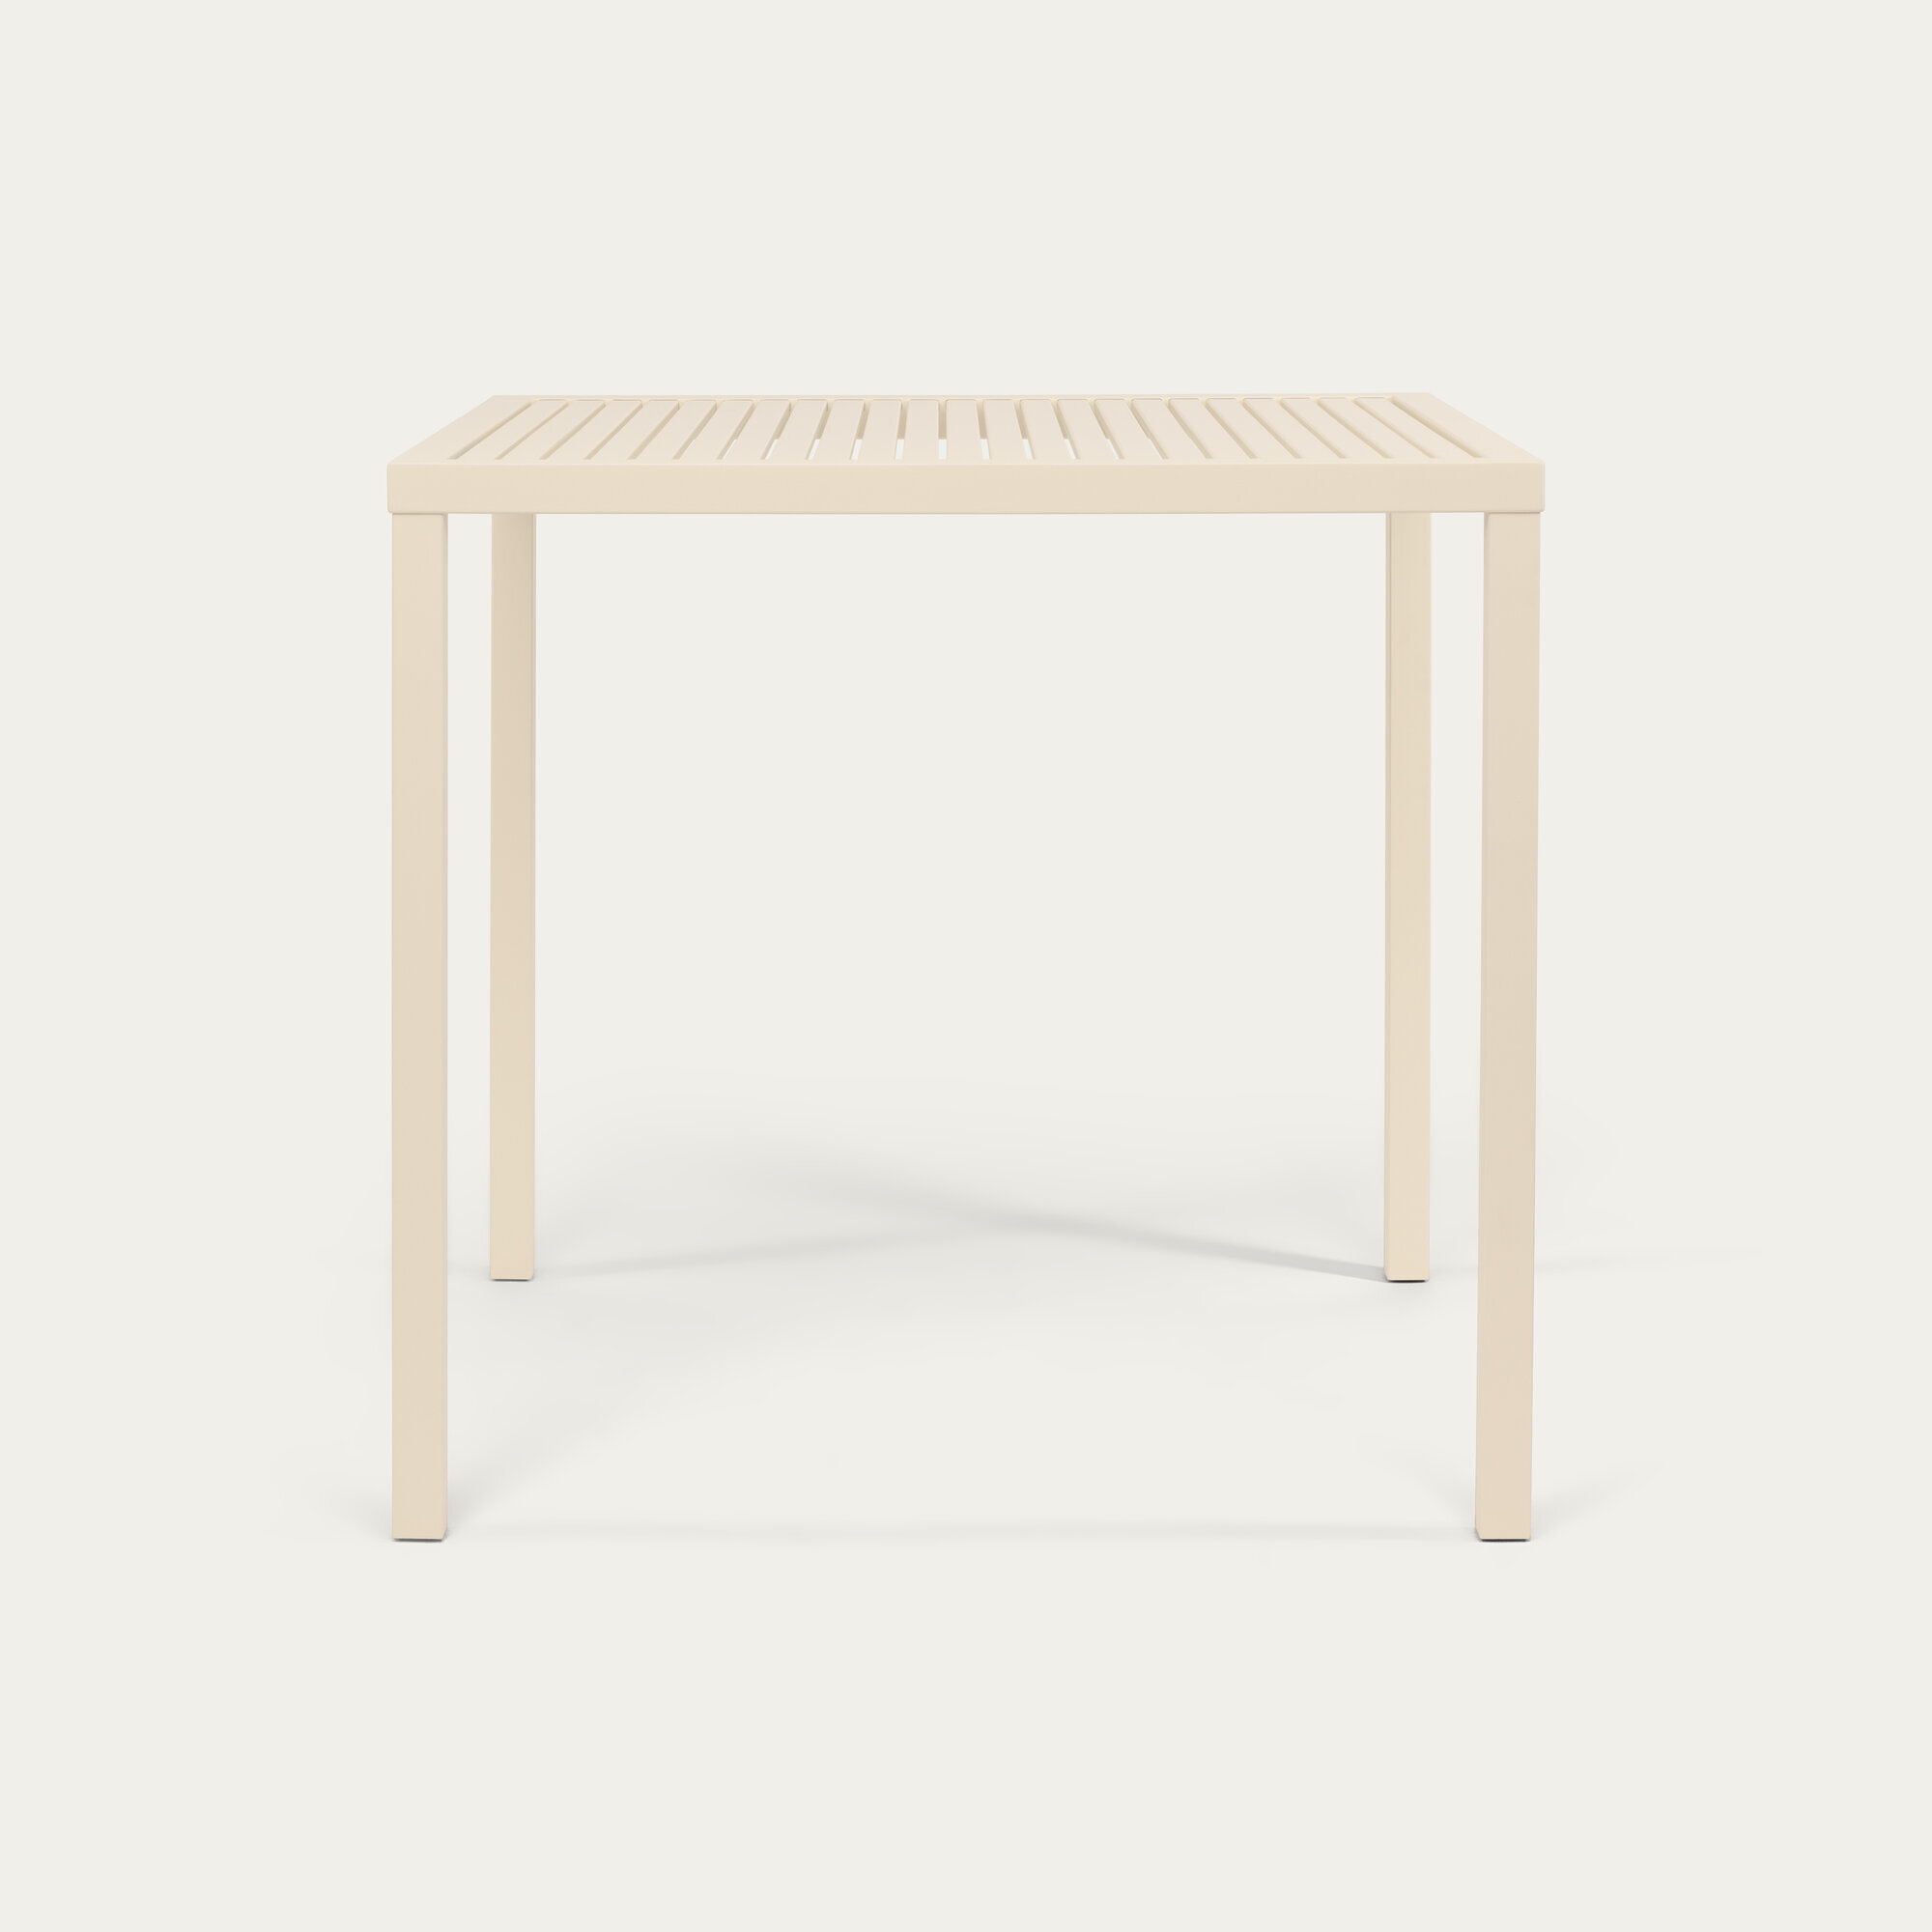 Square outdoor Design dining table | Trace Outdoor Table  Light Ivory KTL | Light Ivory Powdercoating KTL | Studio HENK | 